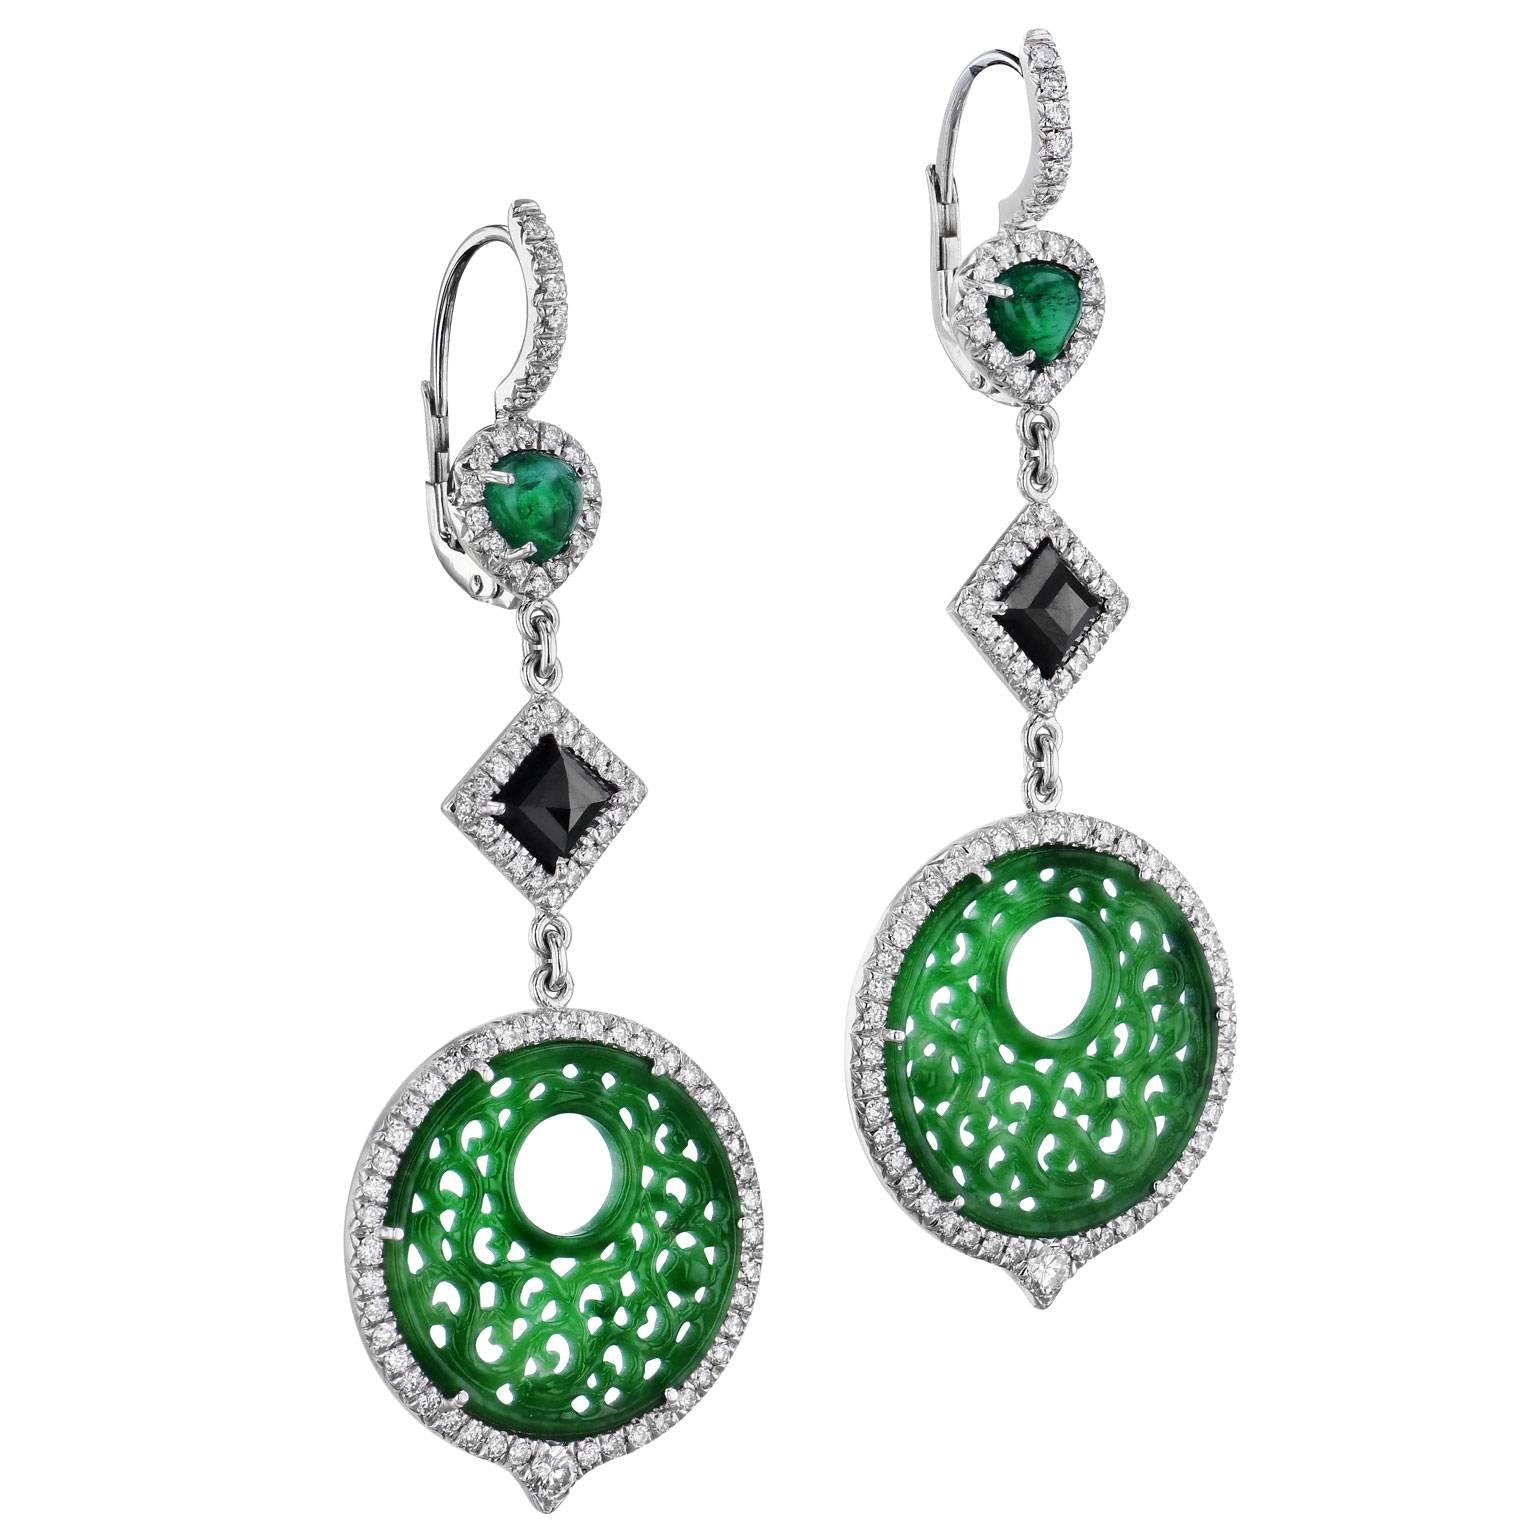 These are one of a kind, handmade earrings by H&H Jewels. They consist of 19 millimeters of fine jadeite that feature exceptional embellishment. They also have 1.48 carats of square black diamonds and 1.19 carats of oval emerald cabochons that trail